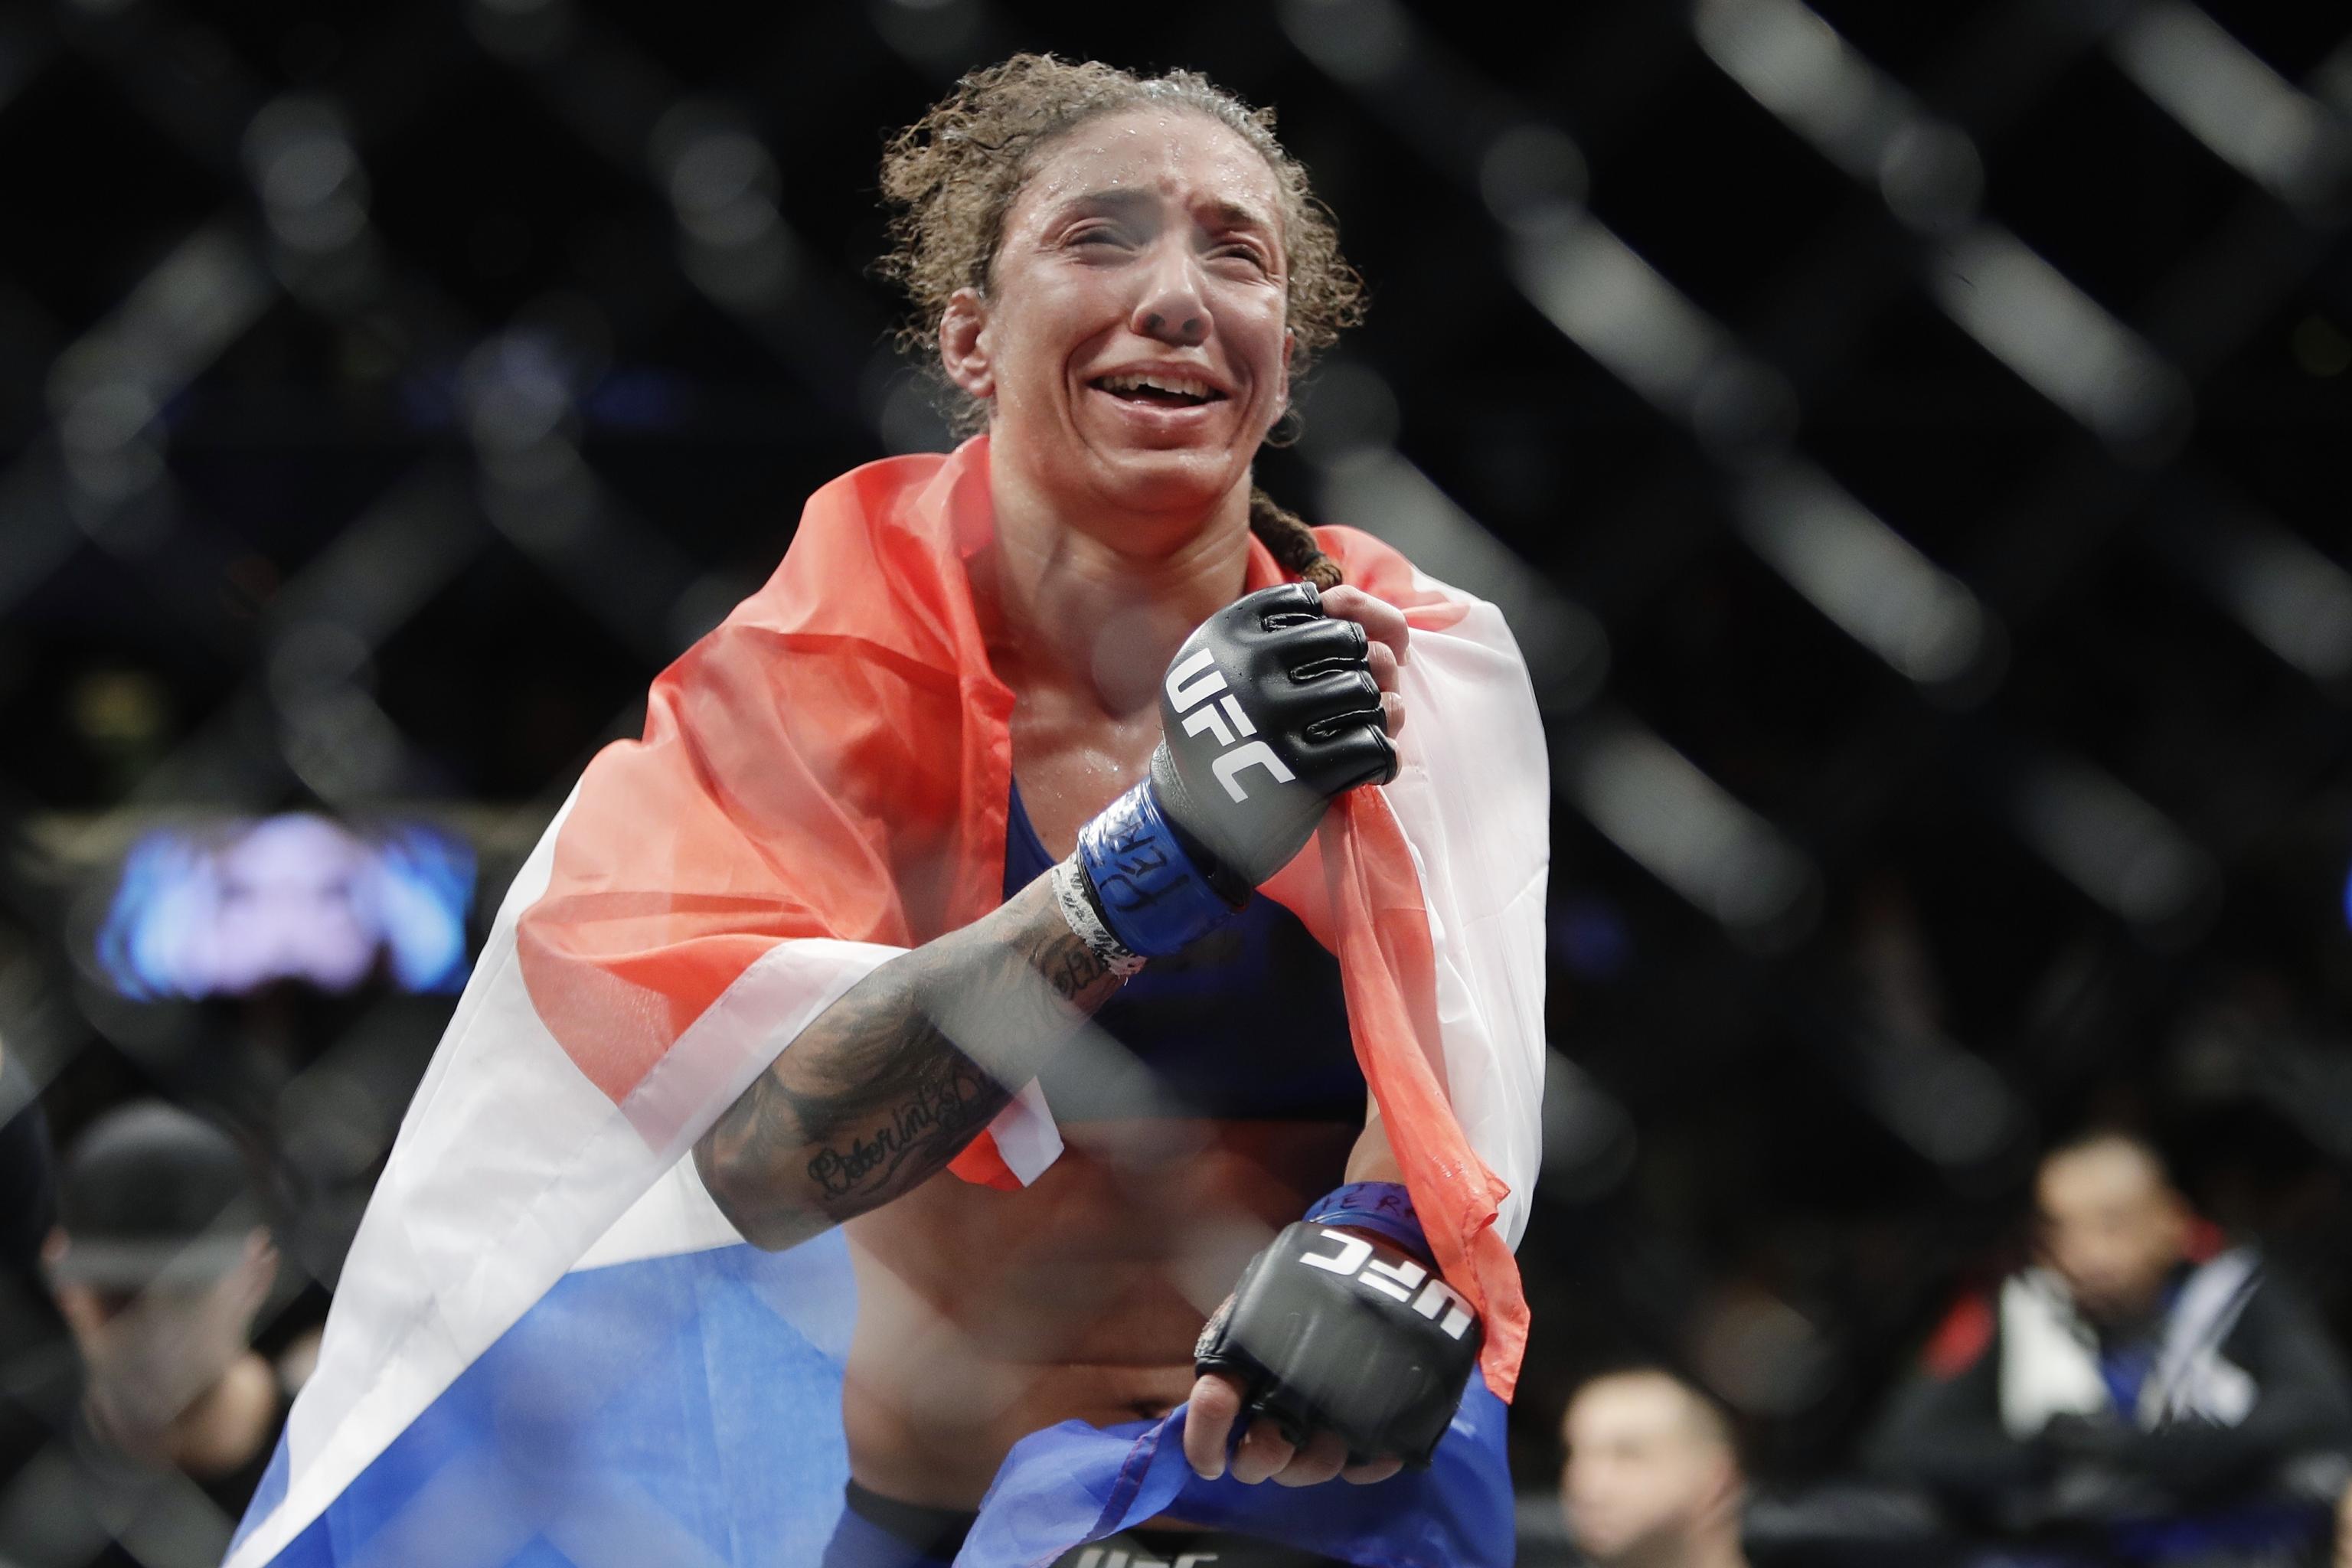 UFC news: Cris Cyborg may get a featherweight title shot as De Randamie is  set to drop to bantamweight division - IBTimes India